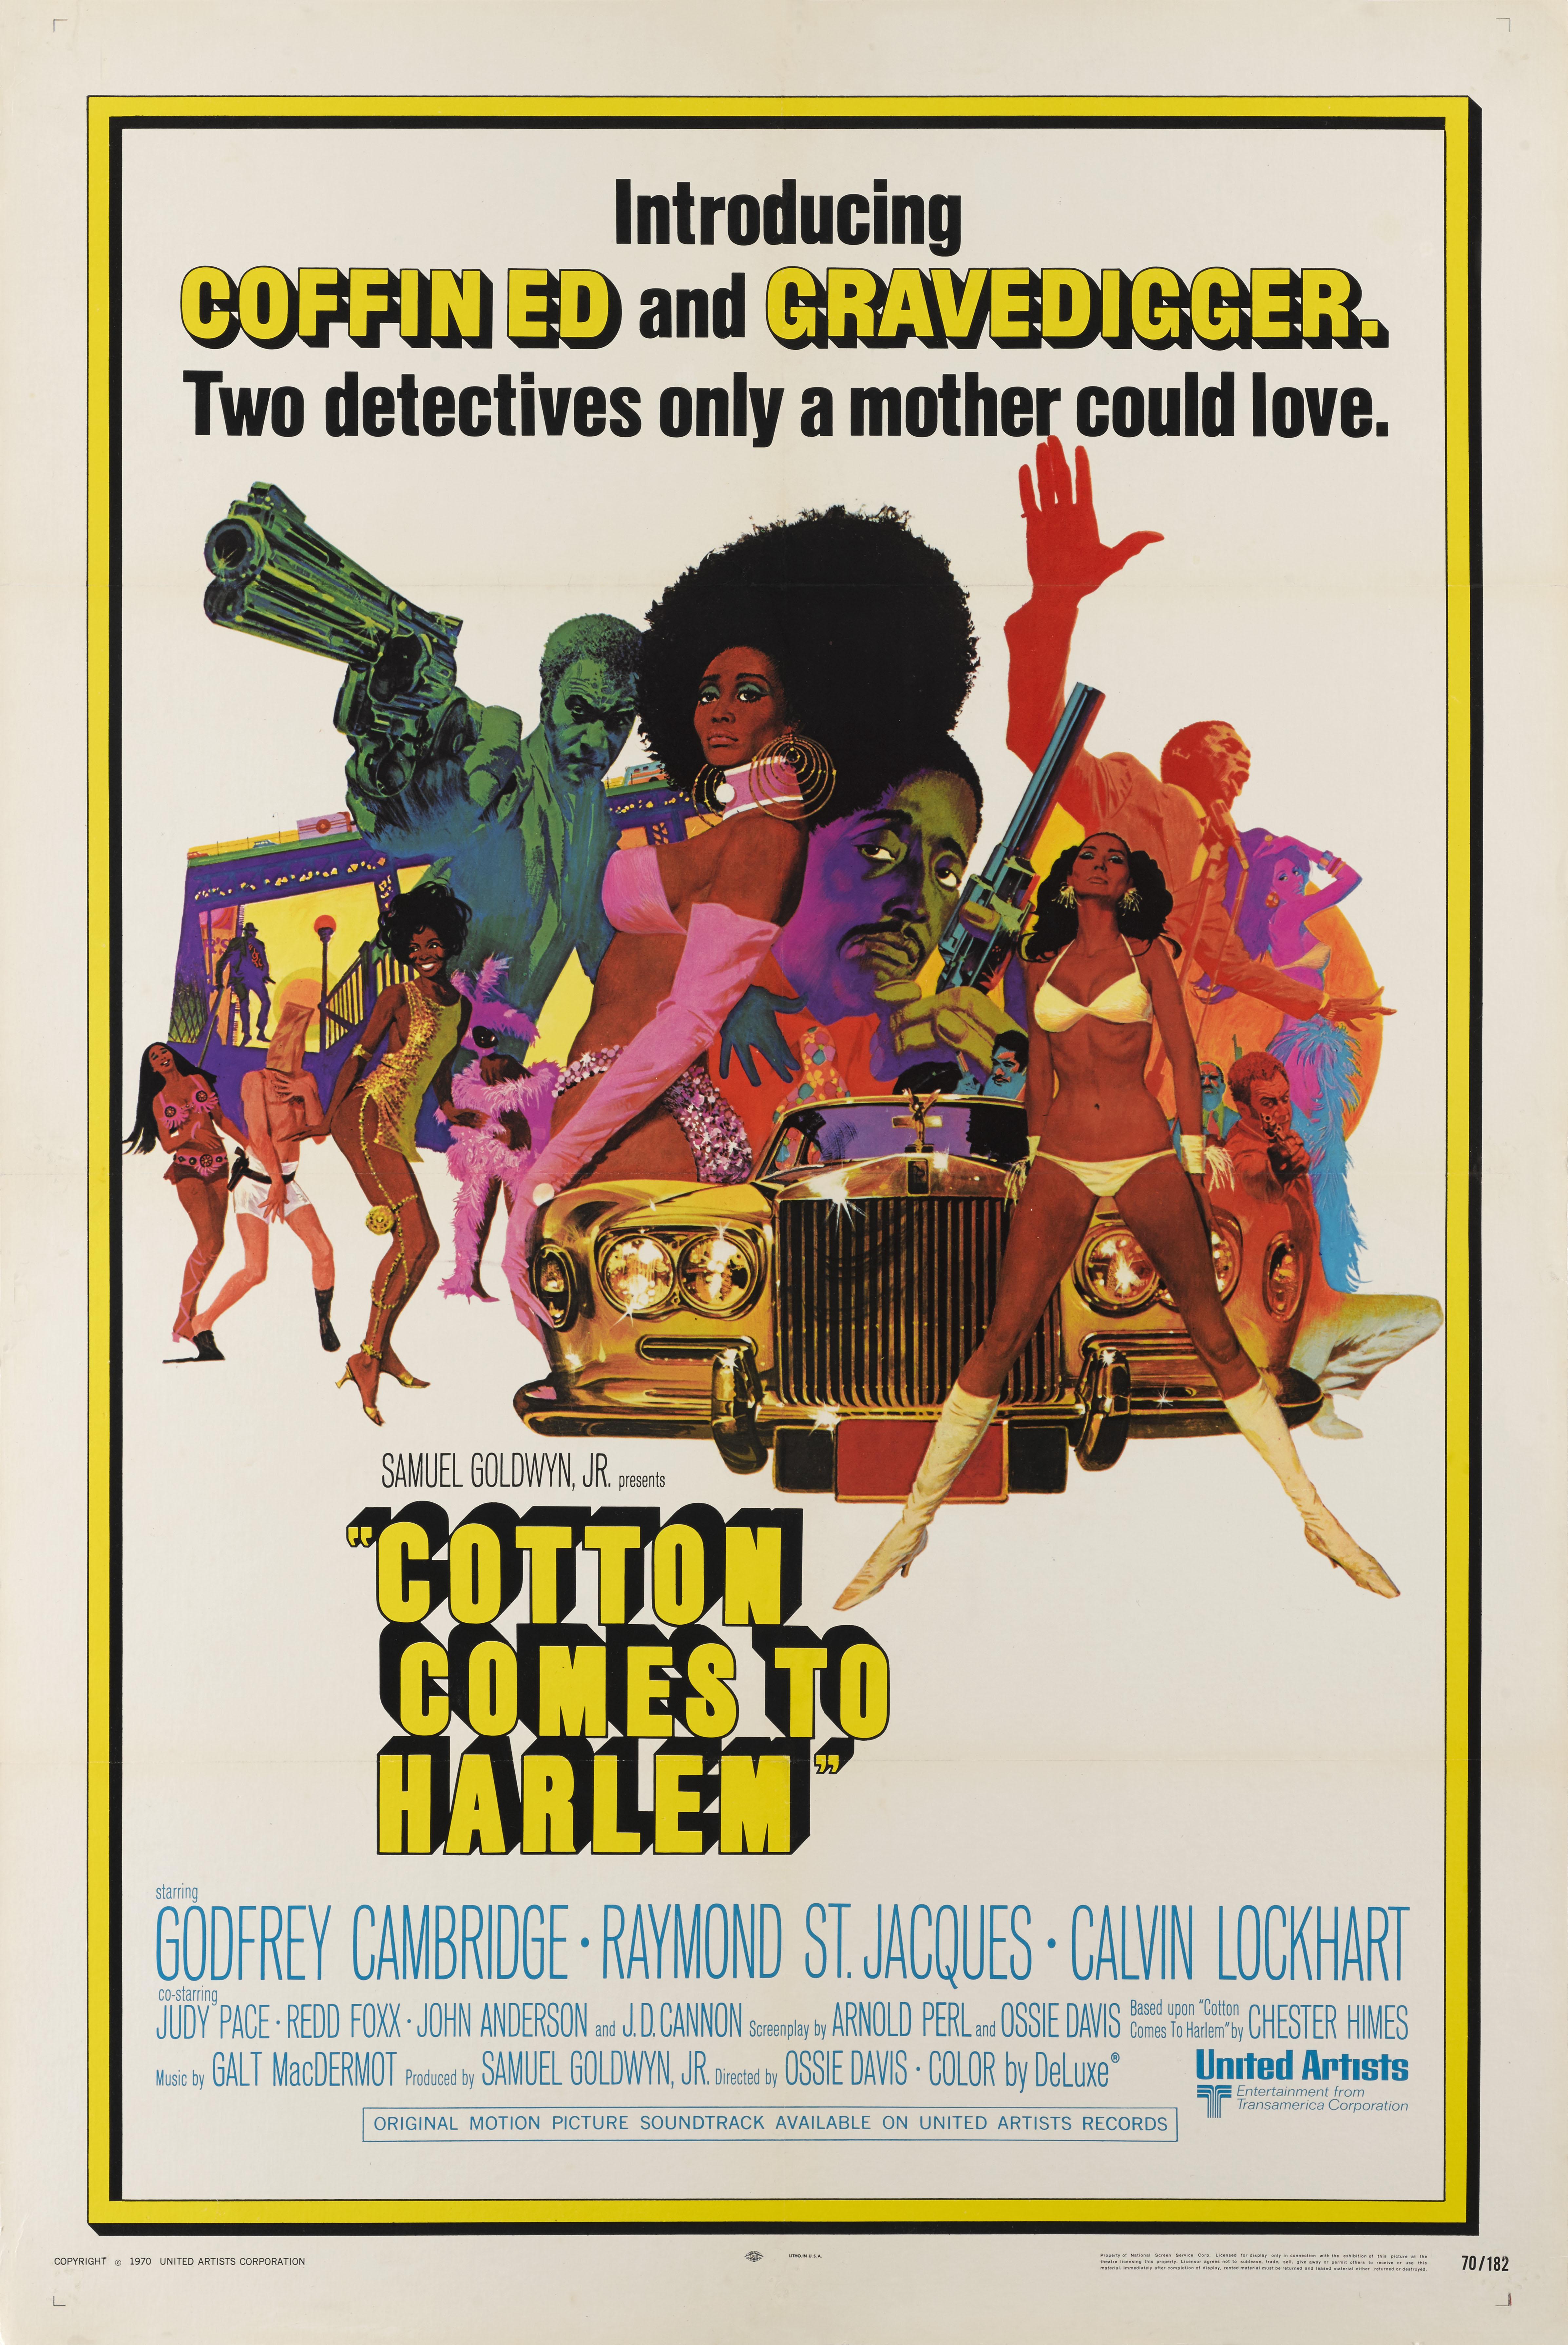 Original US film poster for the 1970 film starring Godfrey Cambridge, Raymond St. Jacques, Calvin Lockhart,
and was directed by Ossie Davis.
The art work is by the American artist and illustrator Robert E. McGinnis (b.1926). 
The poster is